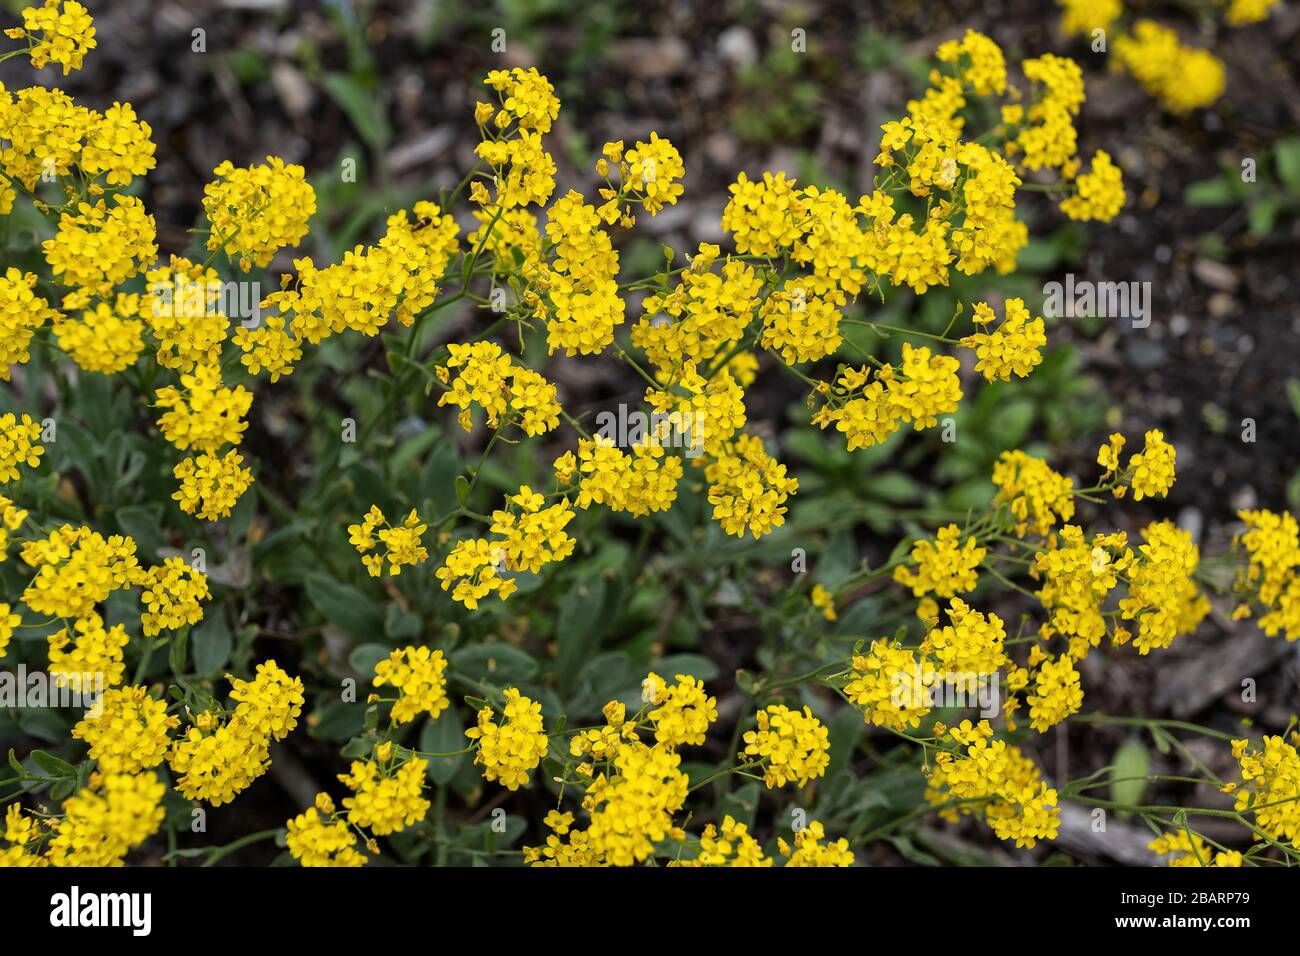 Aurinia saxatilis - Basket of Gold or Golden Alyssum yellow blooming flowers, evergreen parennial plant native to Asia and Europe Stock Photo